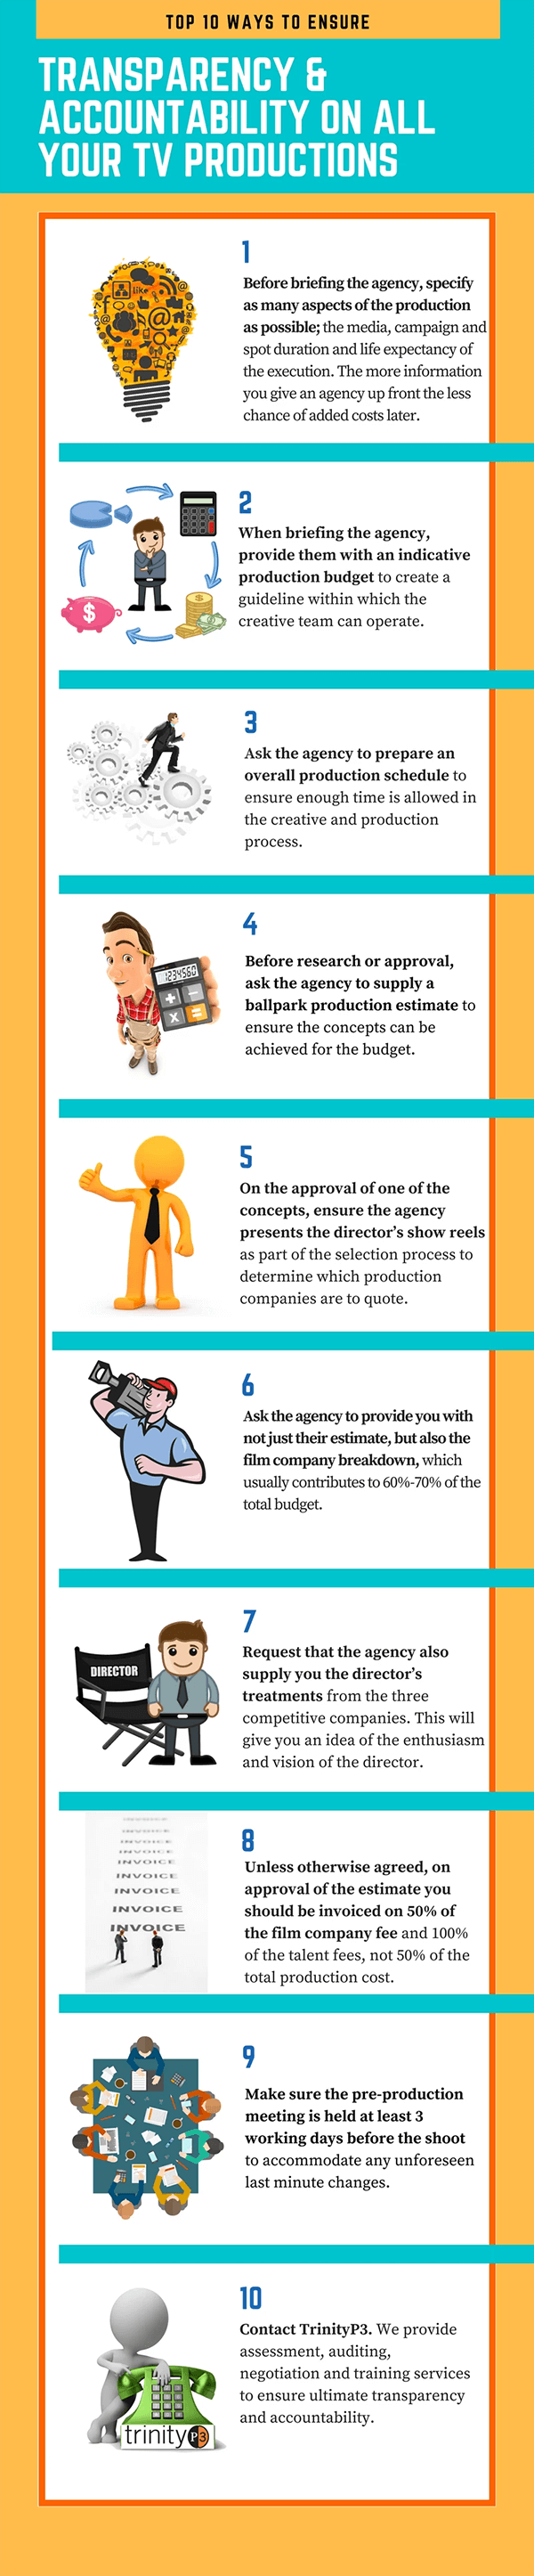 Top 10 ways to ensure transparency & accountability on all your TV productions - Infographic